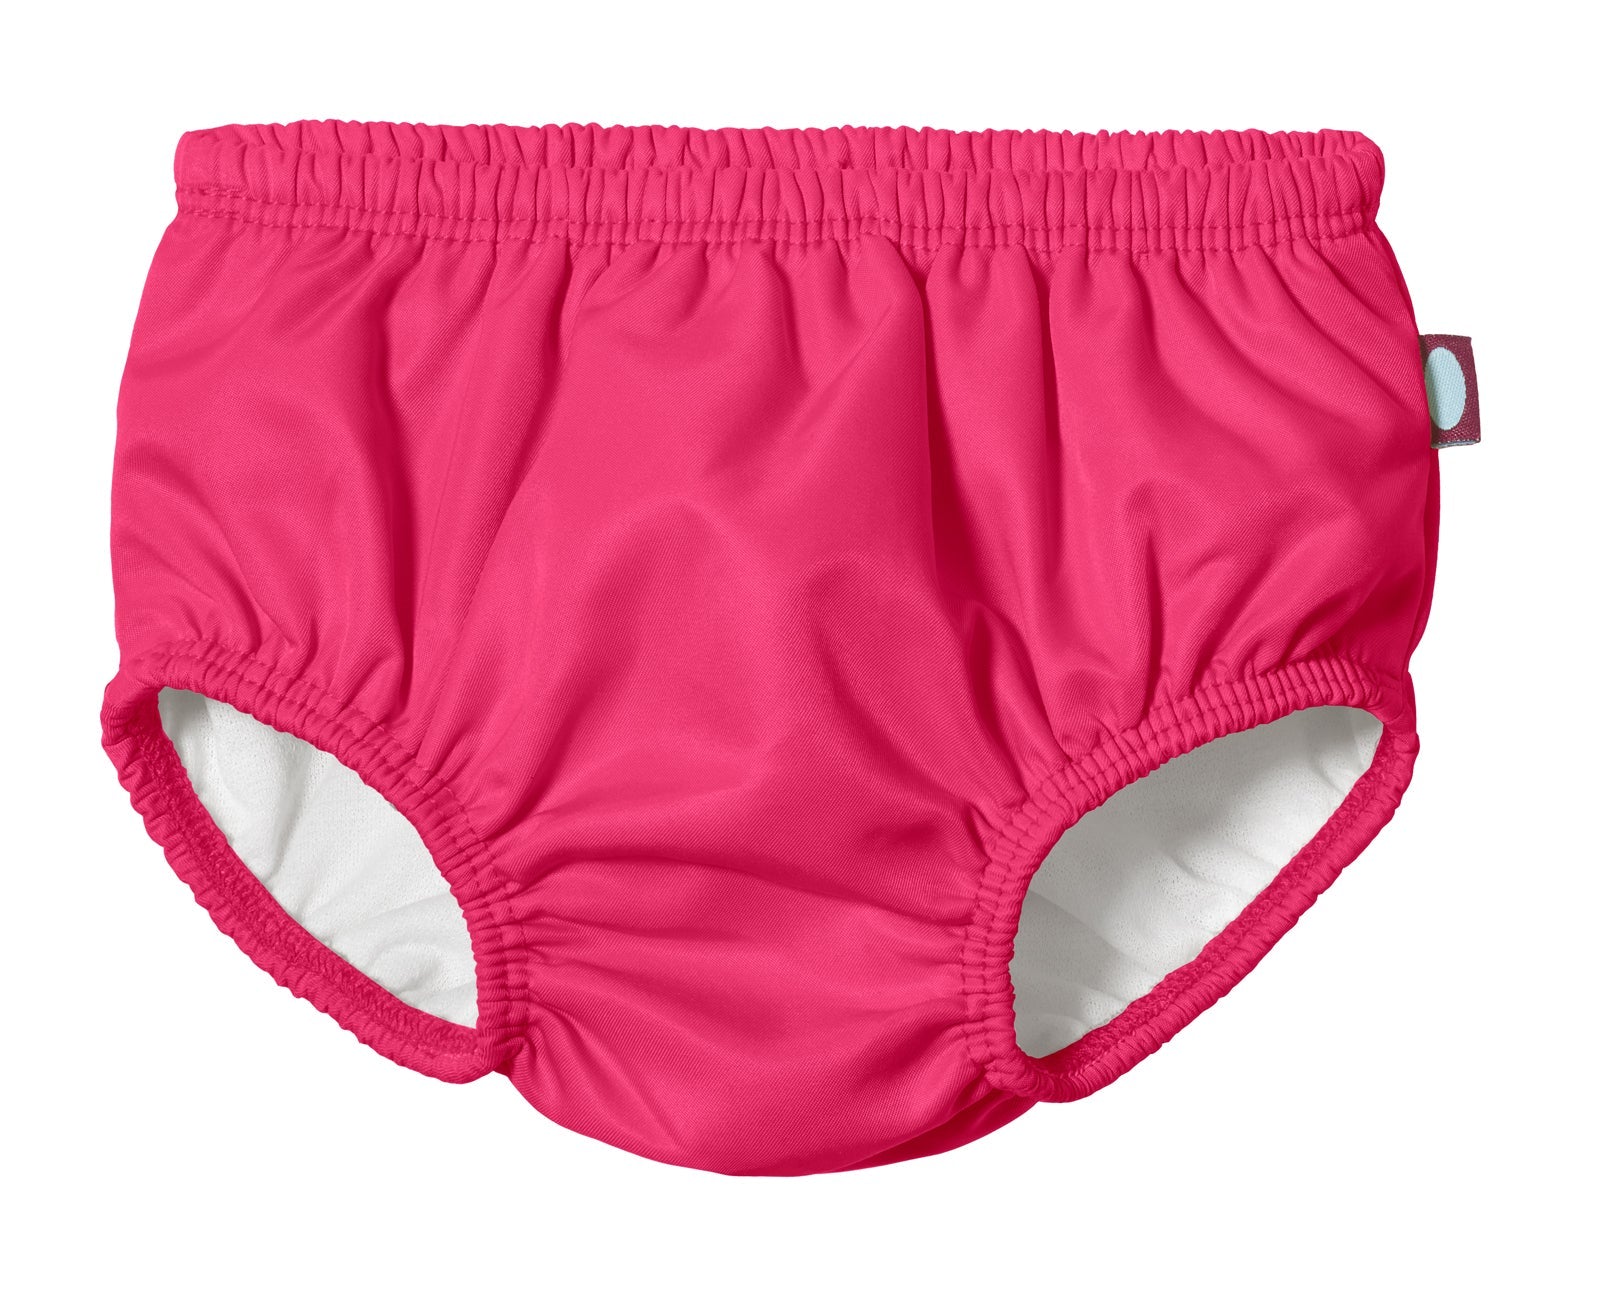 Reusable Swim Diaper For Children, Teen, and Youth Sizes